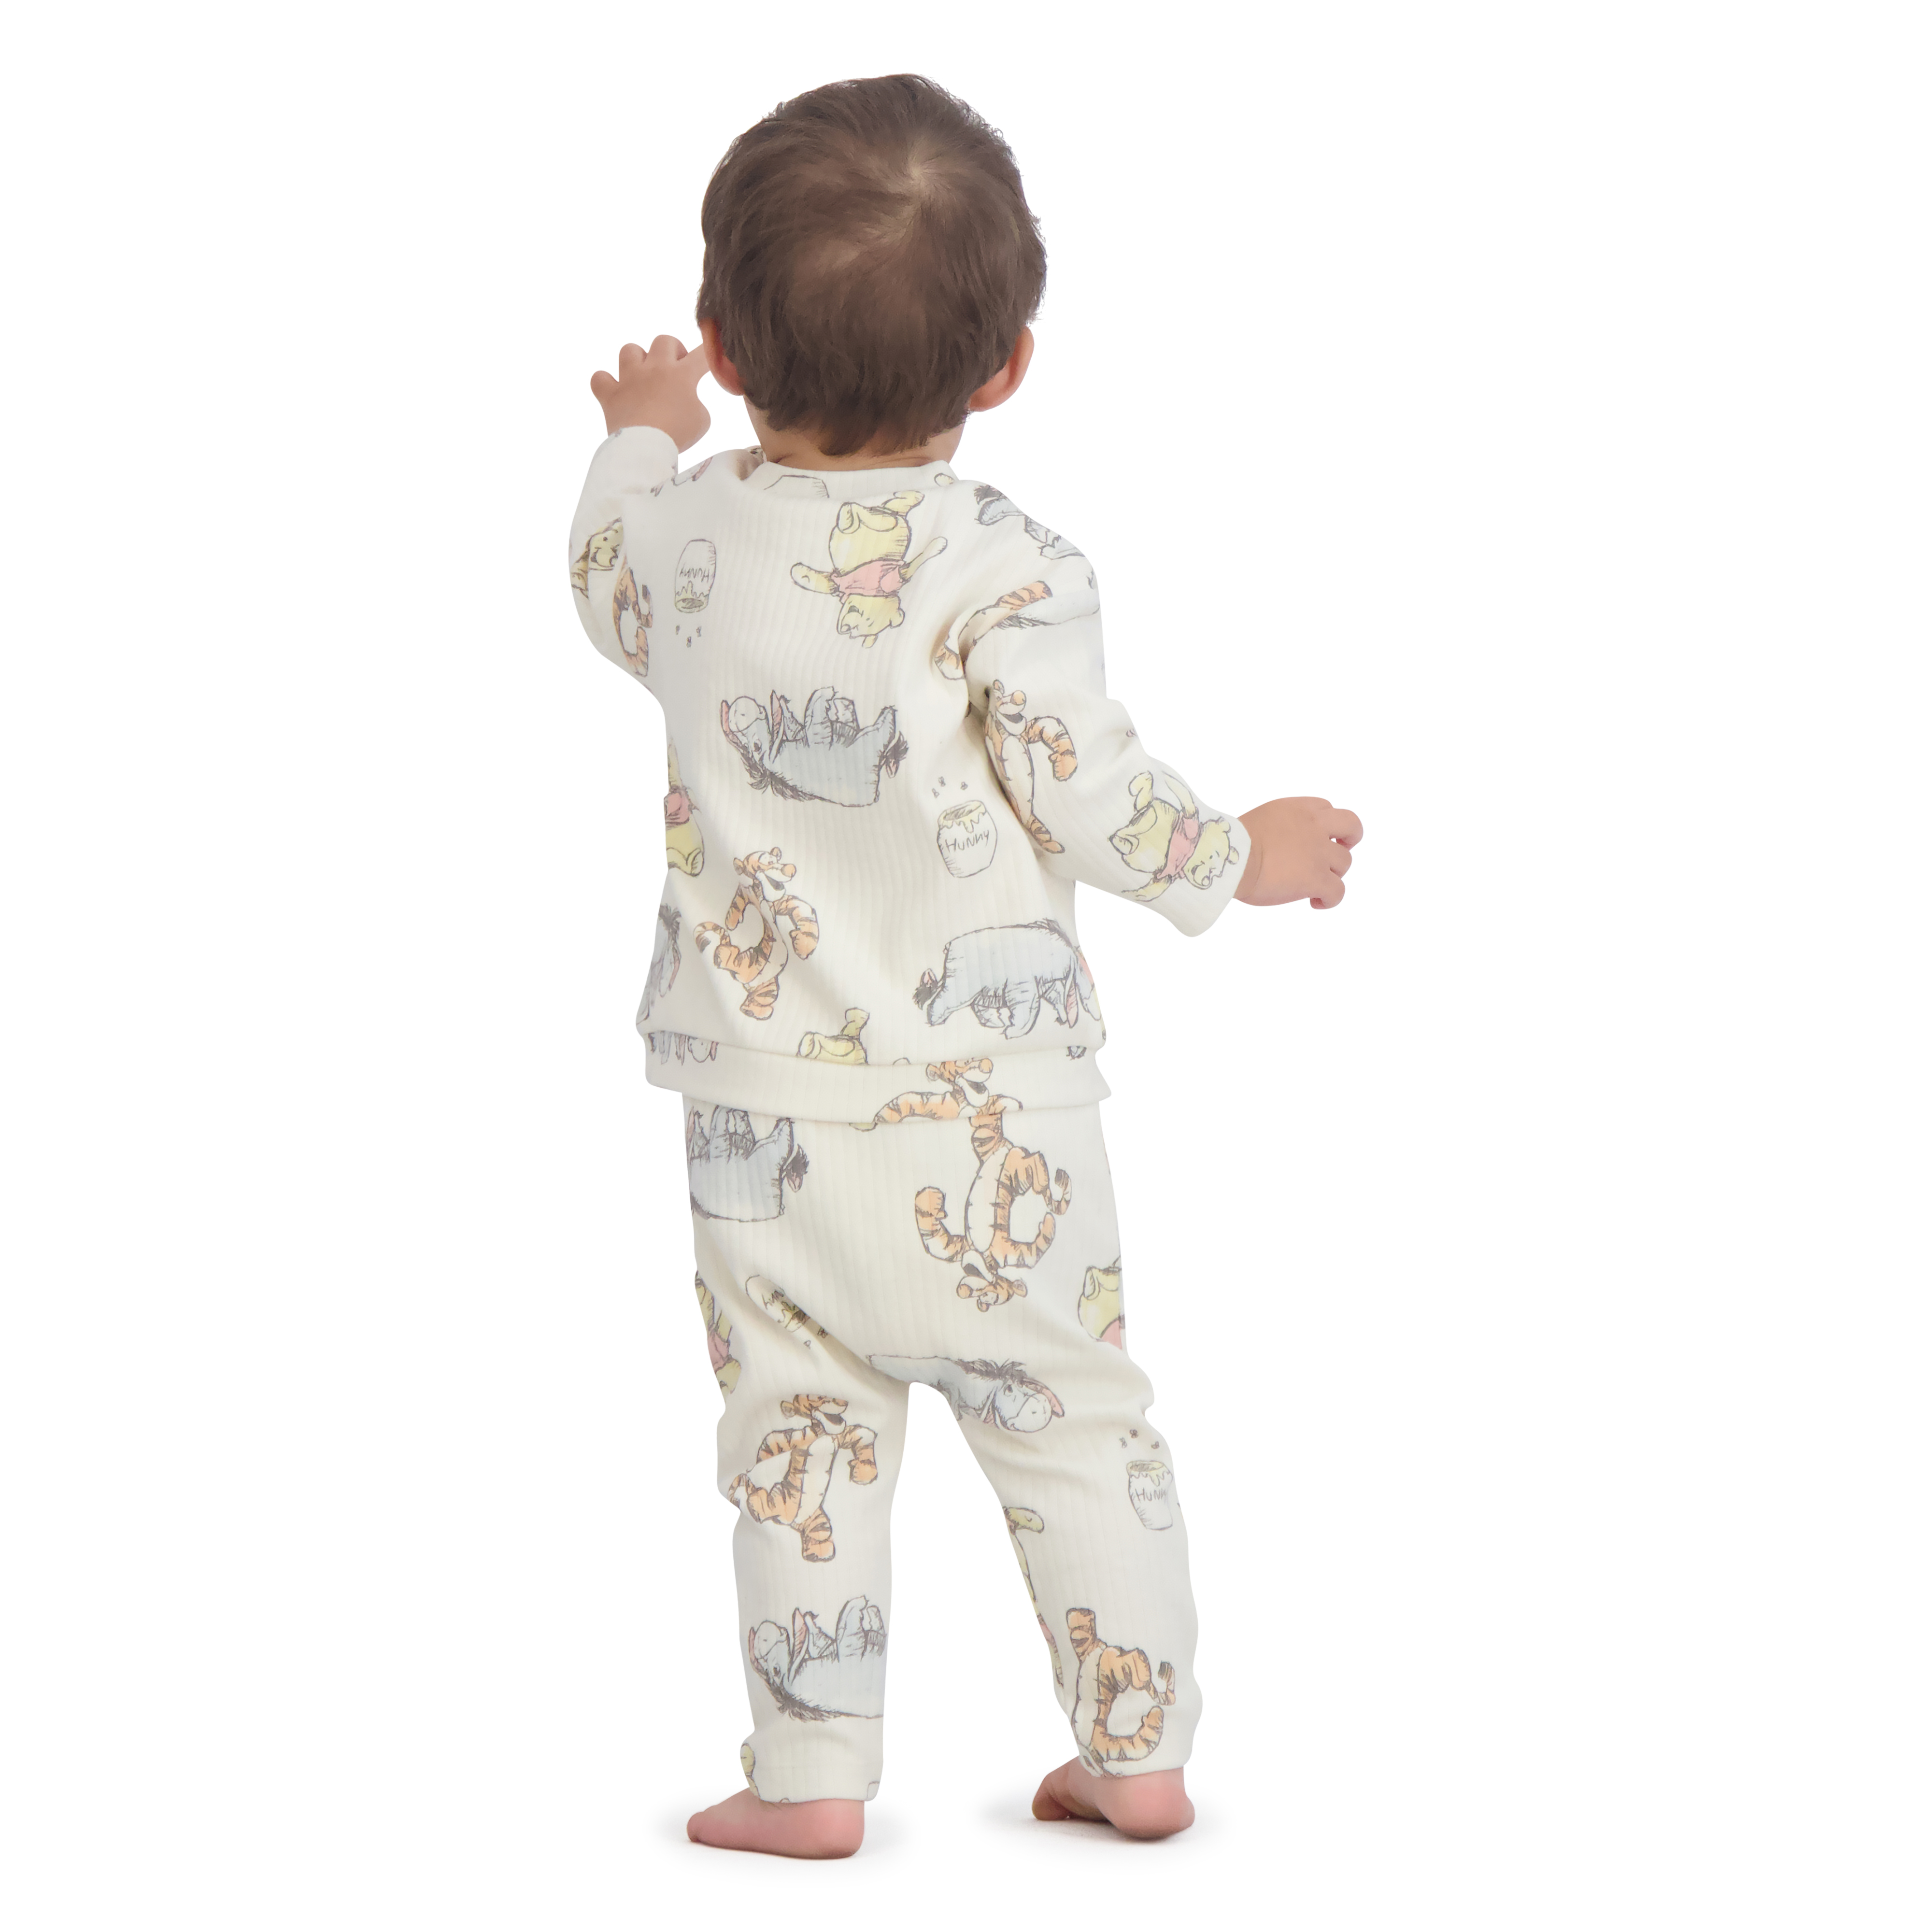 Winnie the Pooh Baby Boy 2 Piece Pant Set, Sizes 0/3 Months-24 Months - image 2 of 8